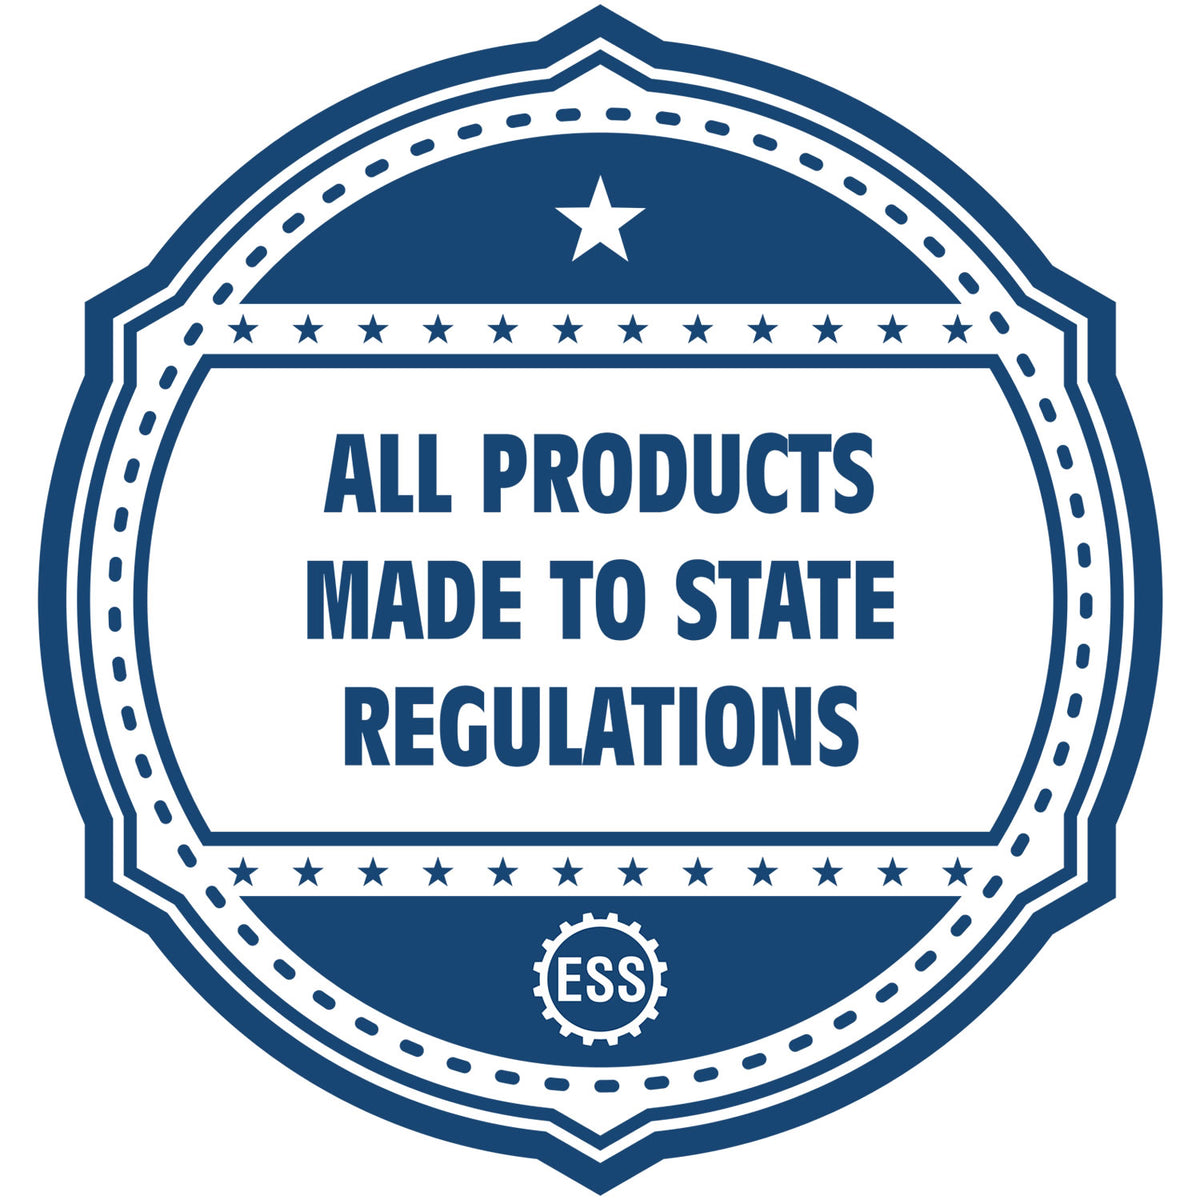 A blue icon or badge for the Colorado Professional Geologist Seal Stamp showing that this product is made in compliance with state regulations.